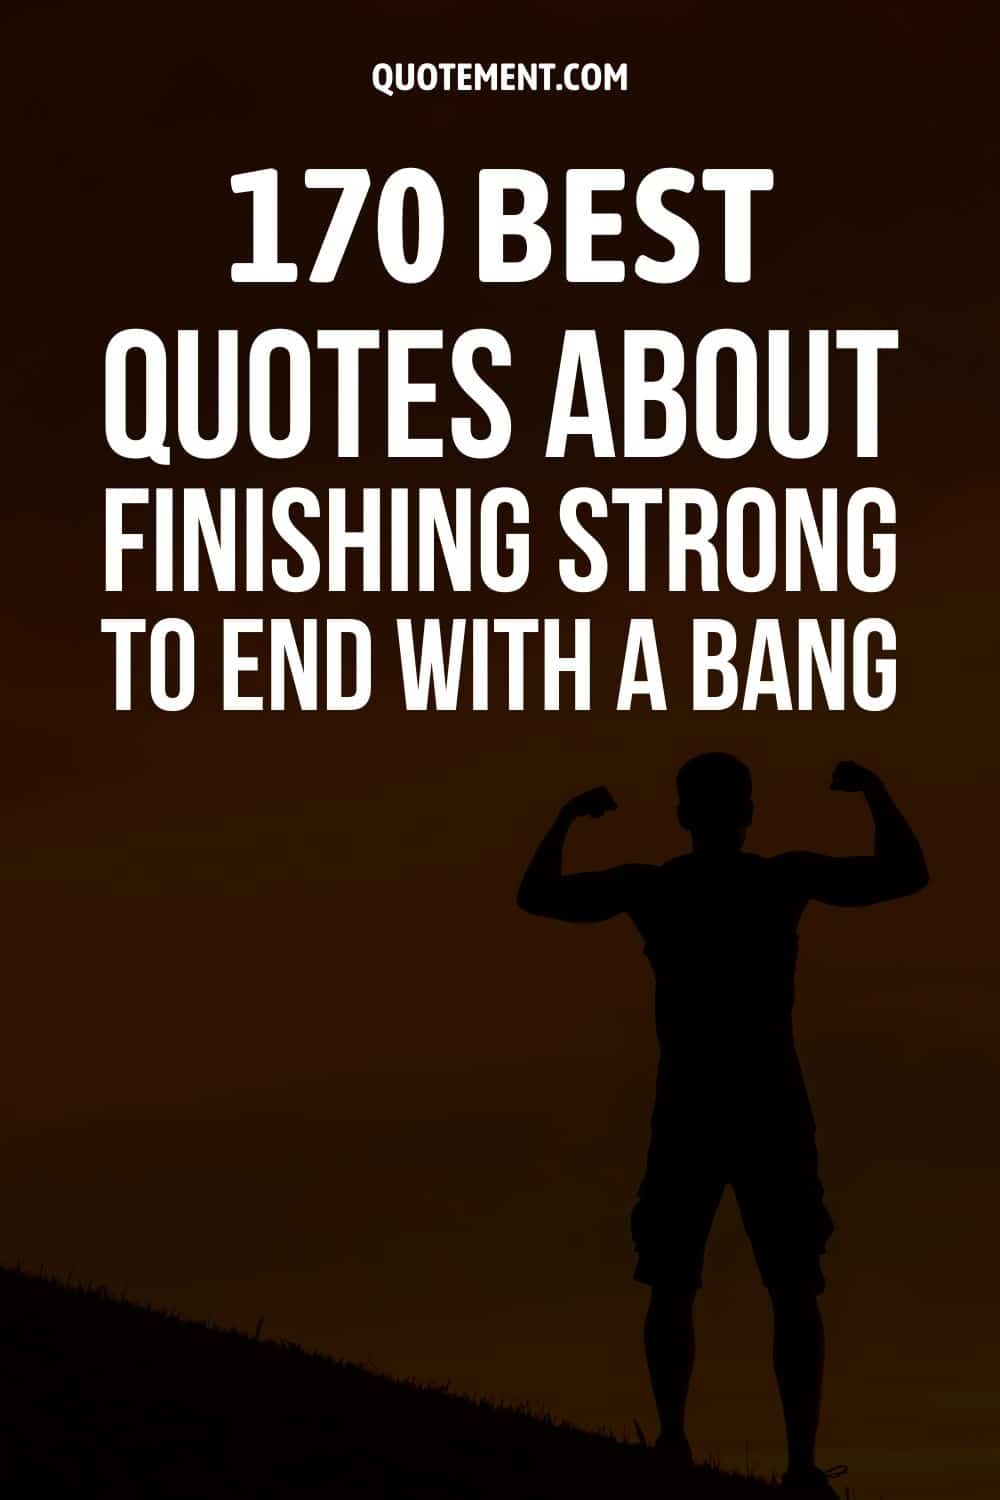 170 Best Quotes About Finishing Strong To End With A Bang